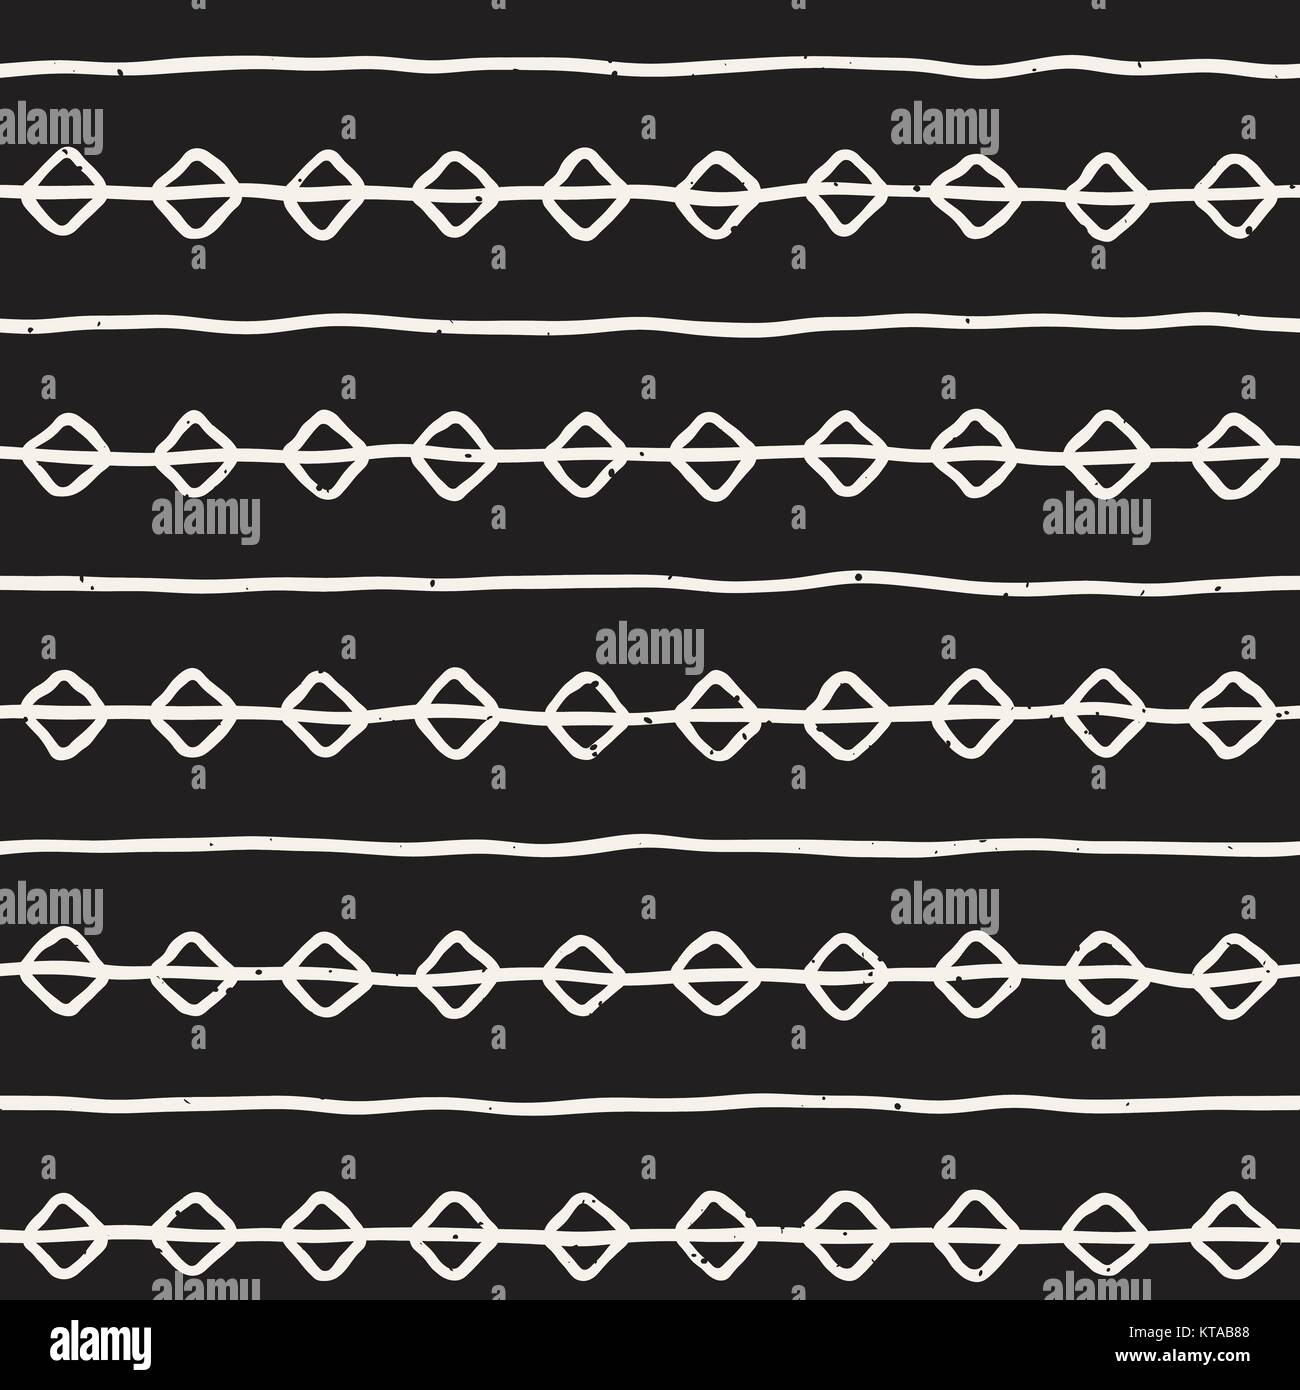 Hand drawn style ethnic seamless pattern. Abstract grungy geometric shapes background in black and white. Stock Vector